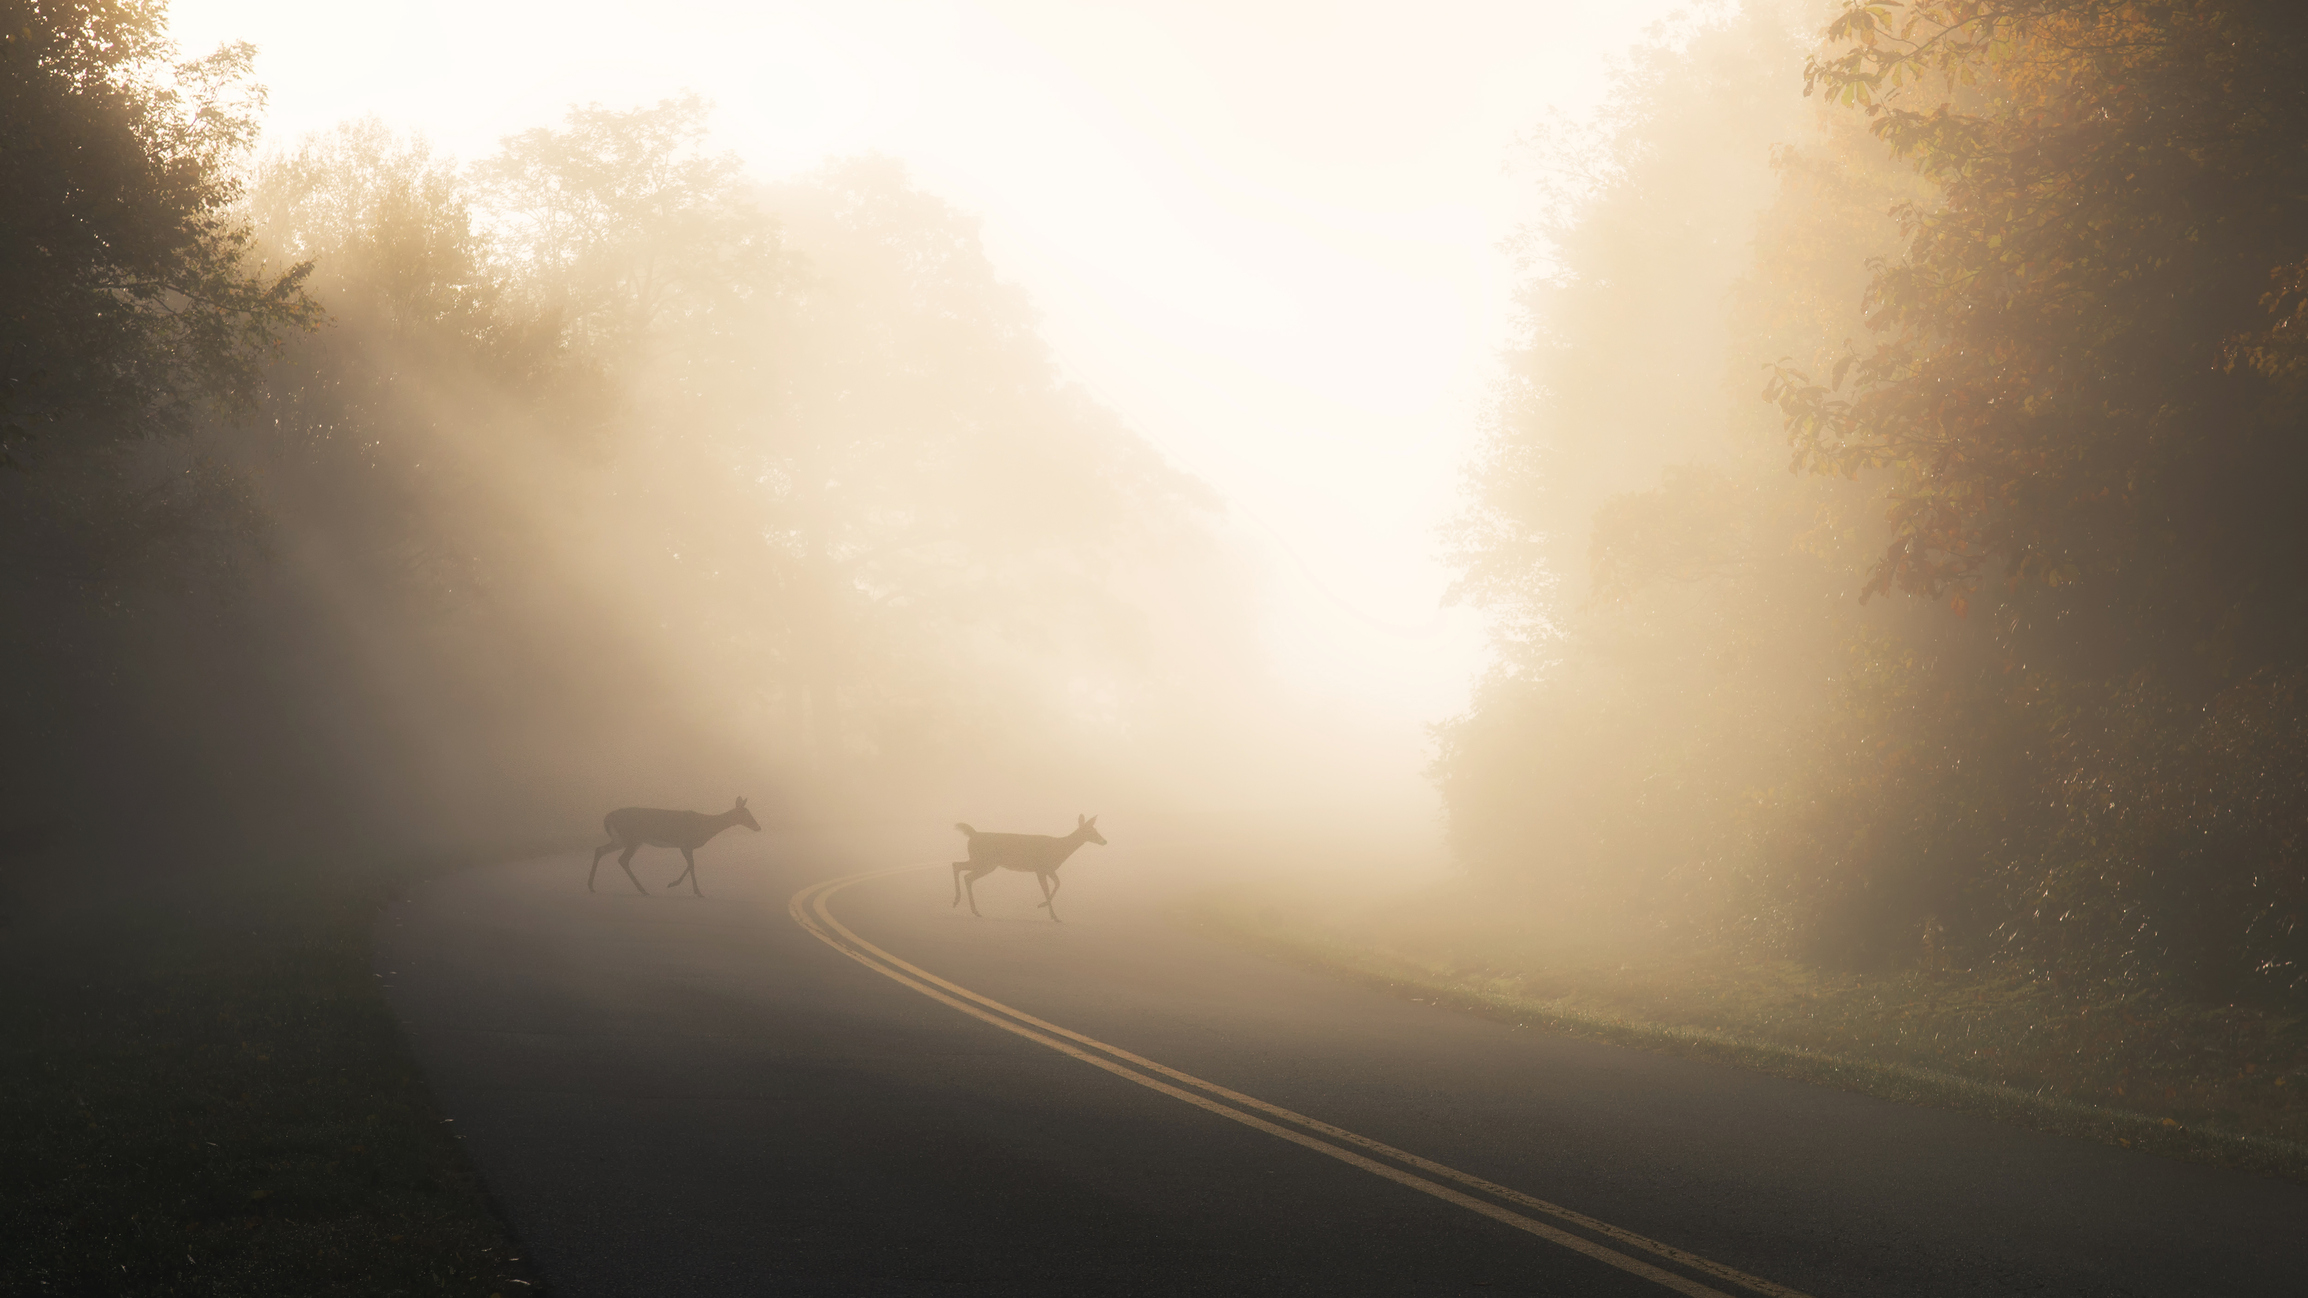 Two deer crossing a two-lane highway in the morning. The sun is shining through the misty morning air, making the deer hard to see.